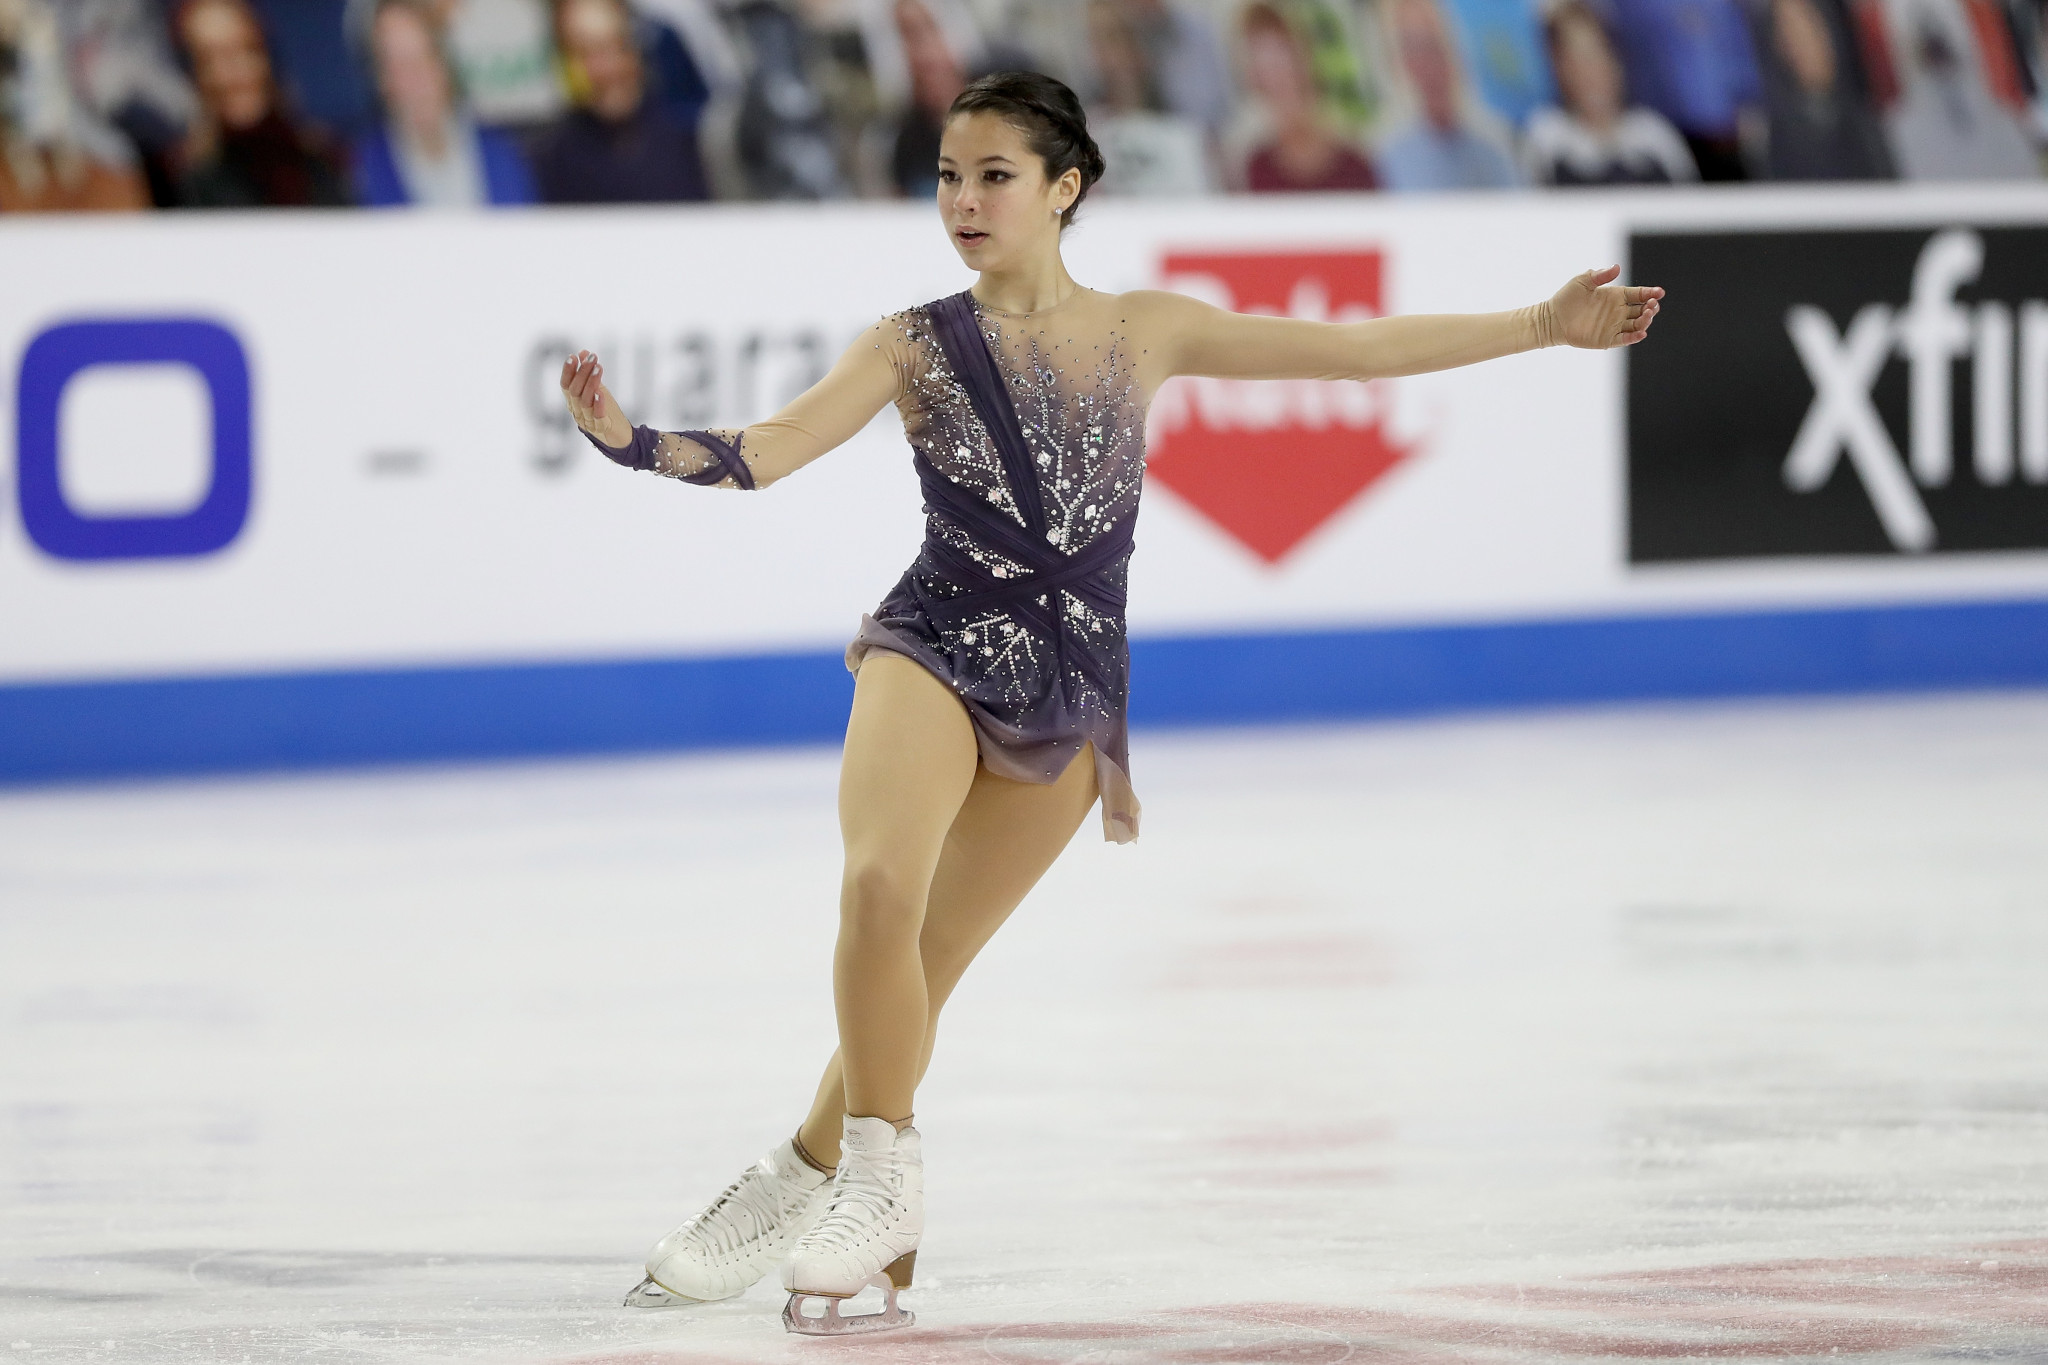 Alysa Liu is facing further COVID-19 tests after contracting COVID-19 ©Getty Images